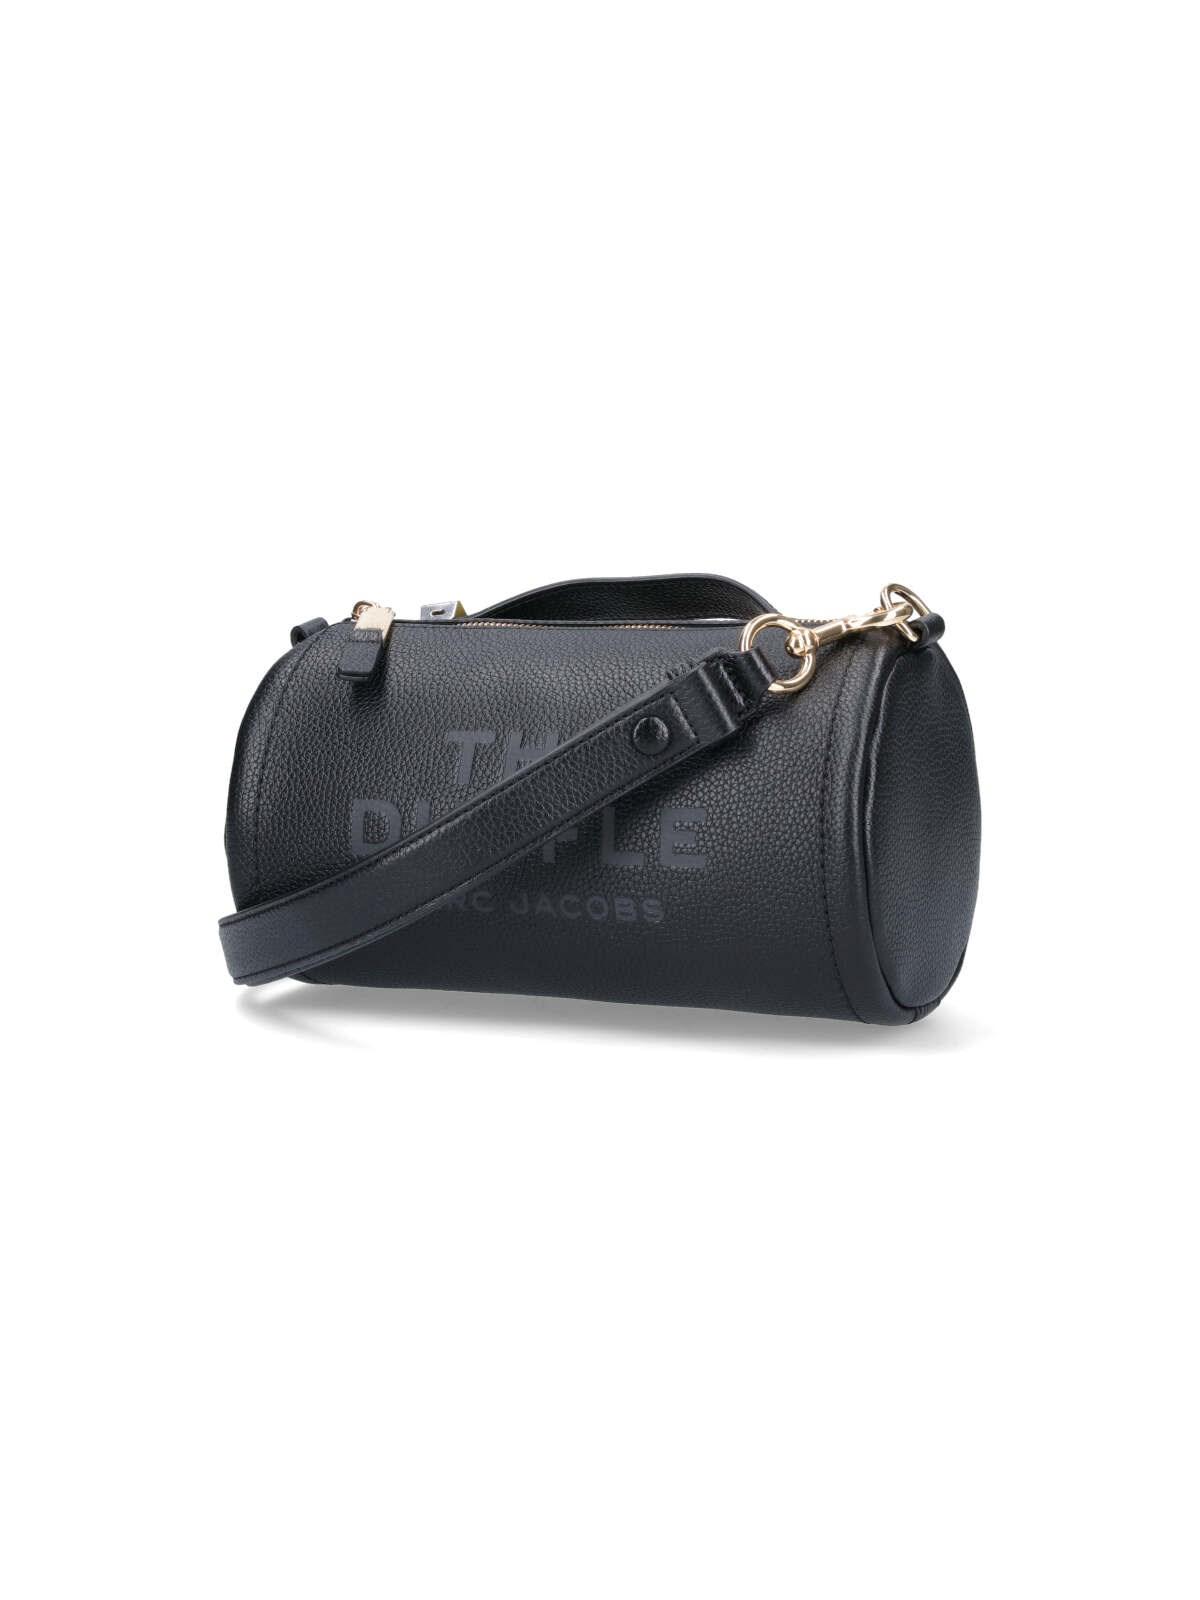 Shop Marc Jacobs The Duffle Crossbody Bag In Black